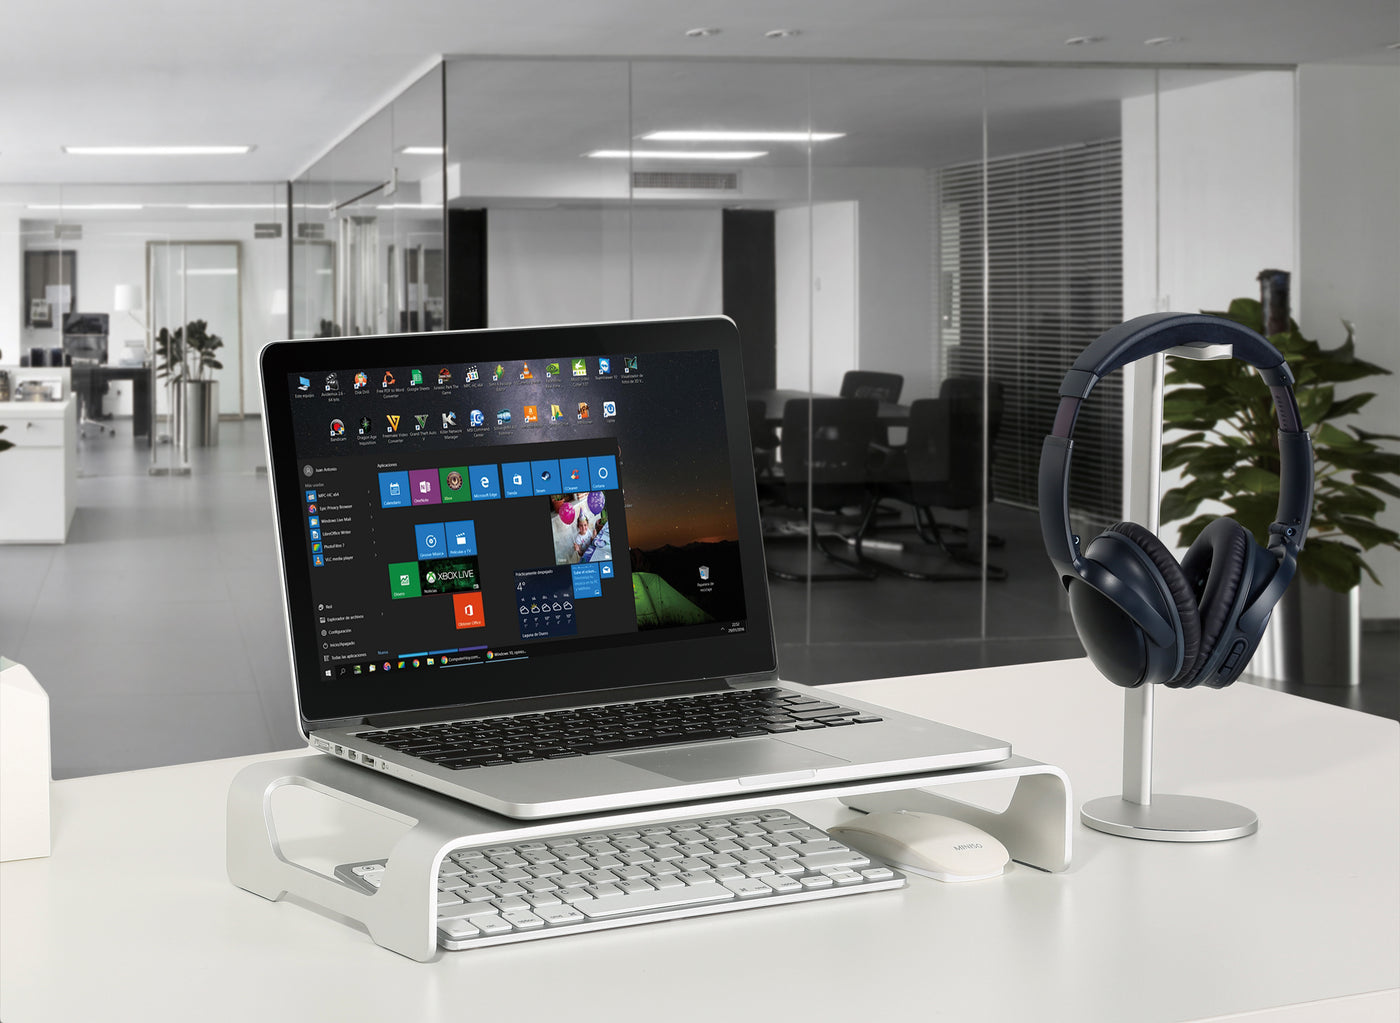 Elevate your monitor 2.25 inches off the surface of your desk with a monitor riser.